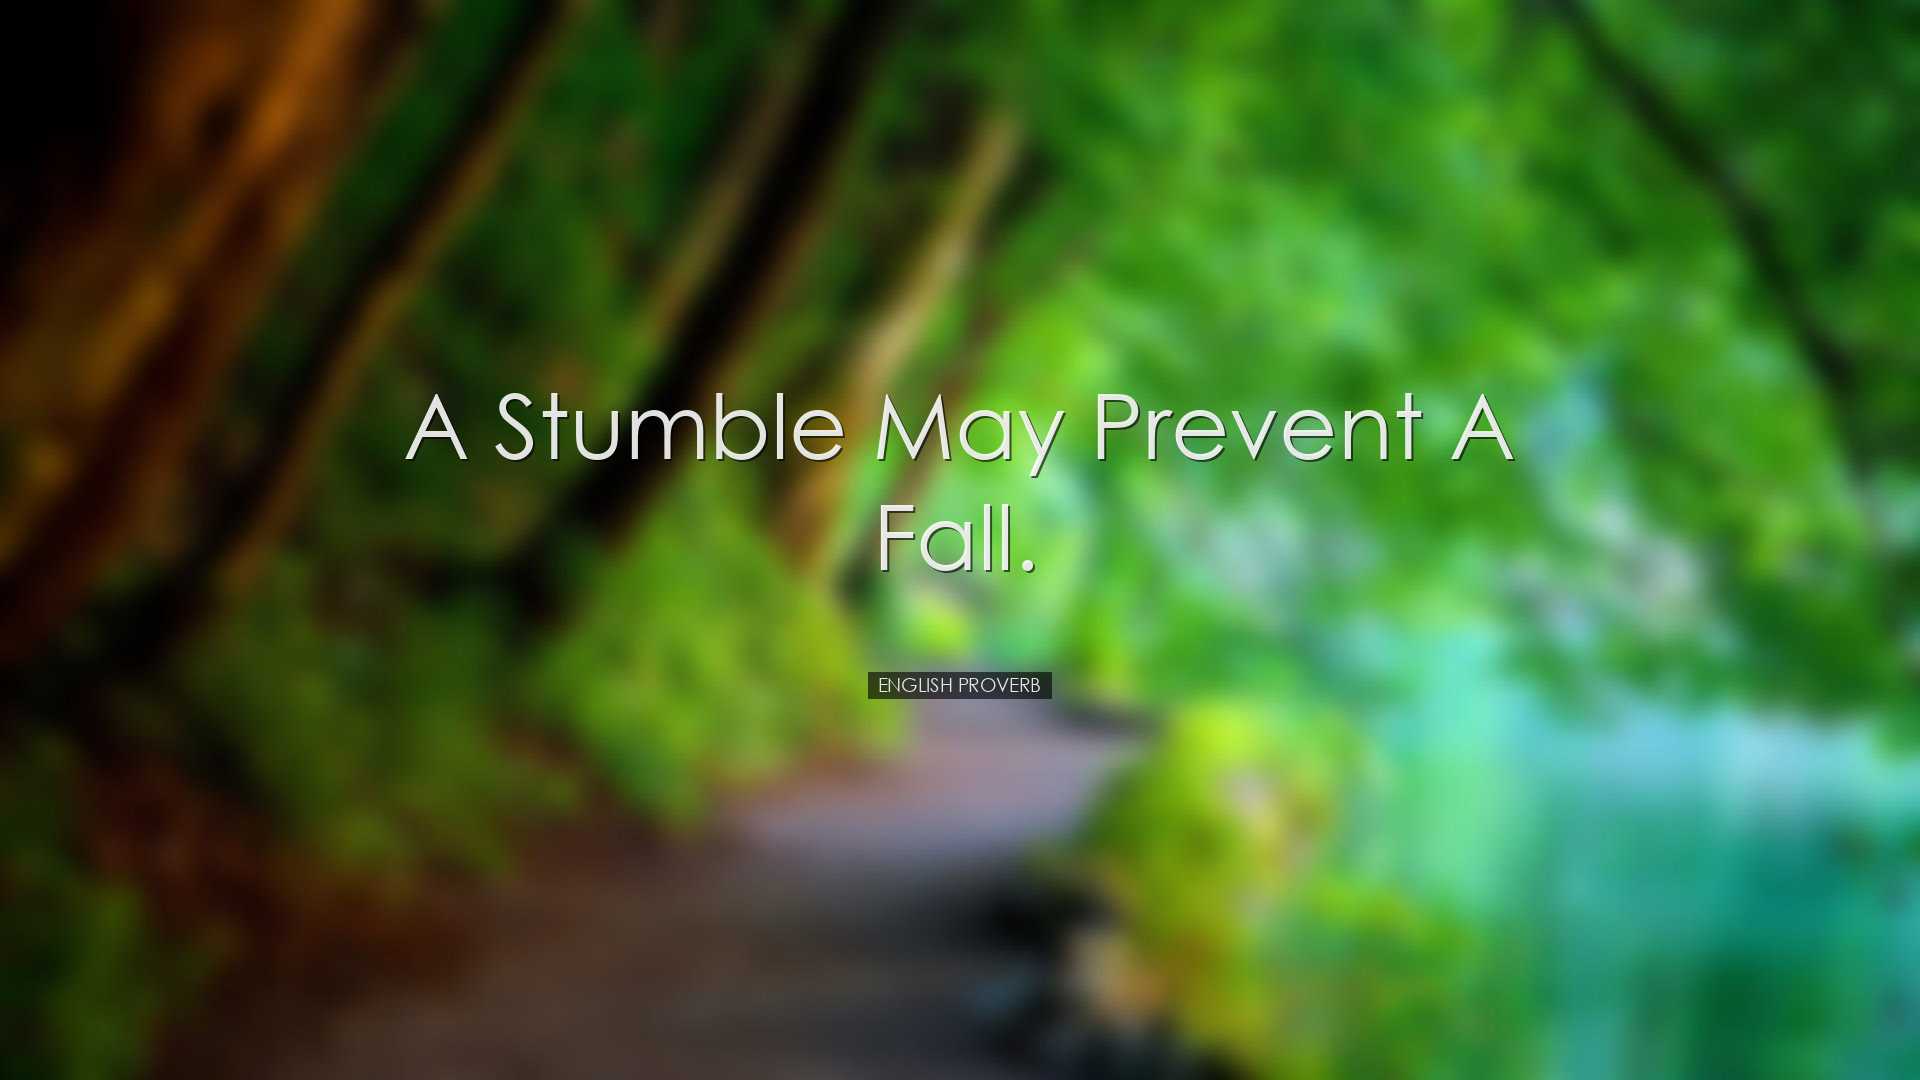 A stumble may prevent a fall. - English Proverb